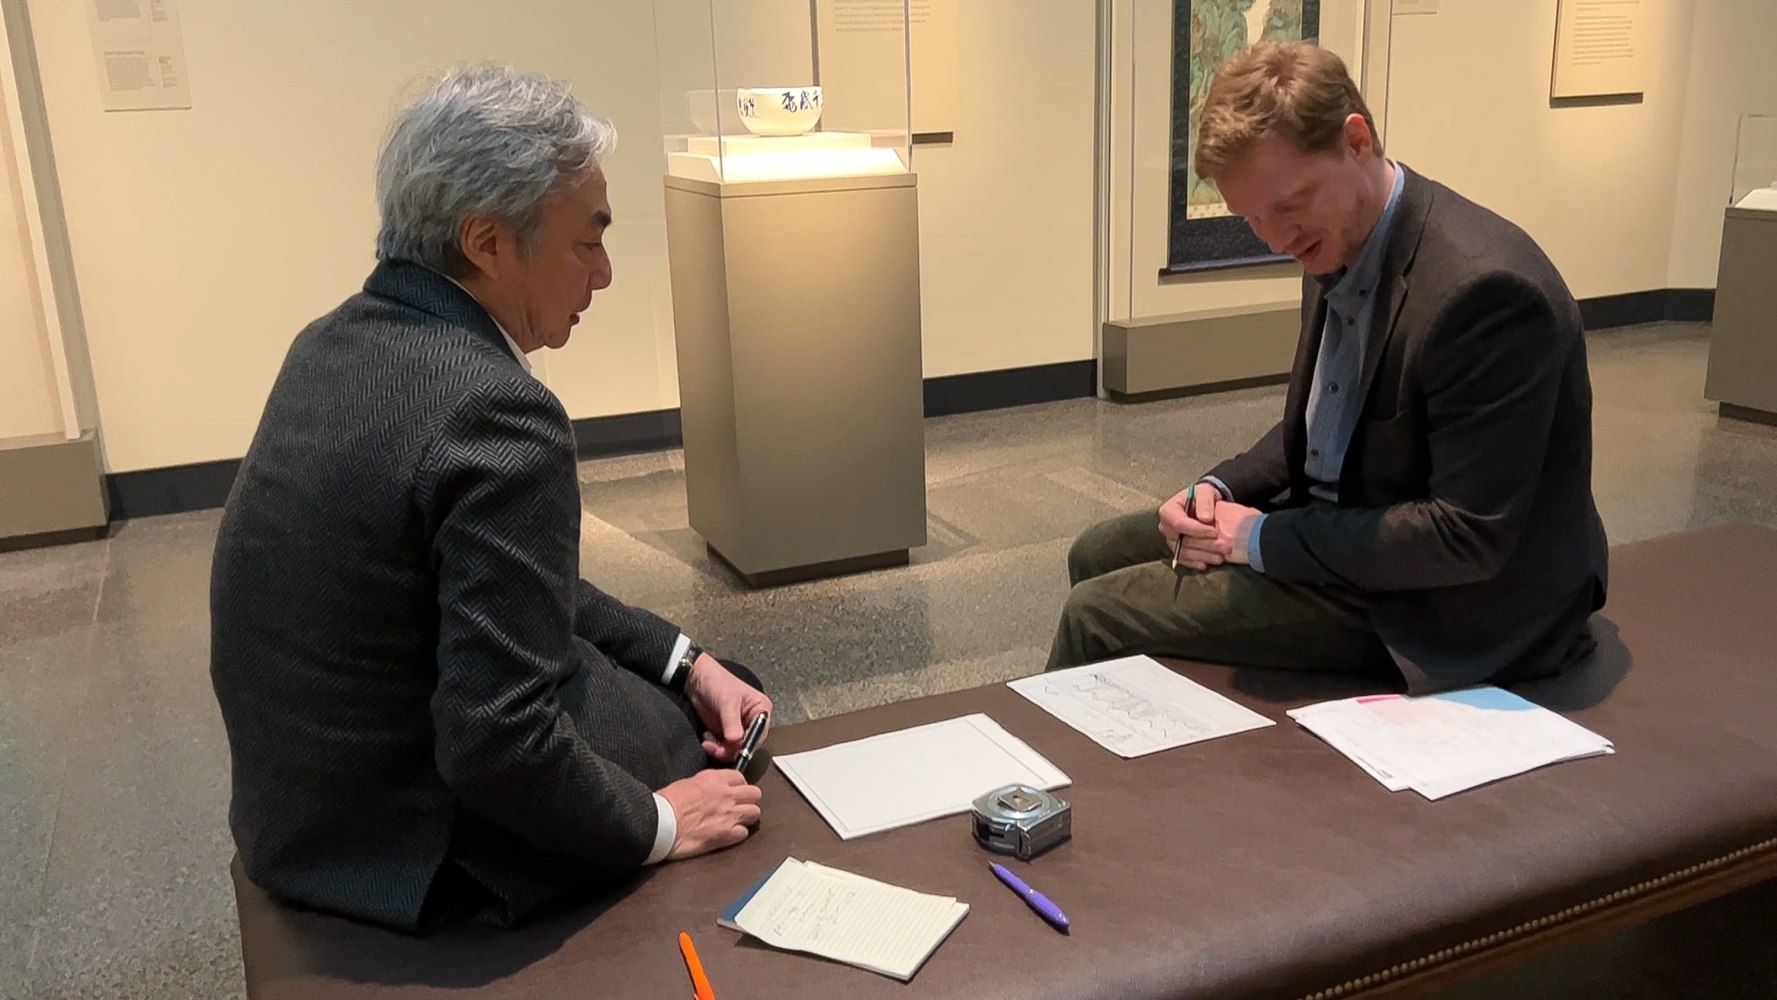 Discussing with Dr. Frank Feltens, a curator of the Freer Gallery of Art. &amp;nbsp;He is a leading specialists in Japanese Art.